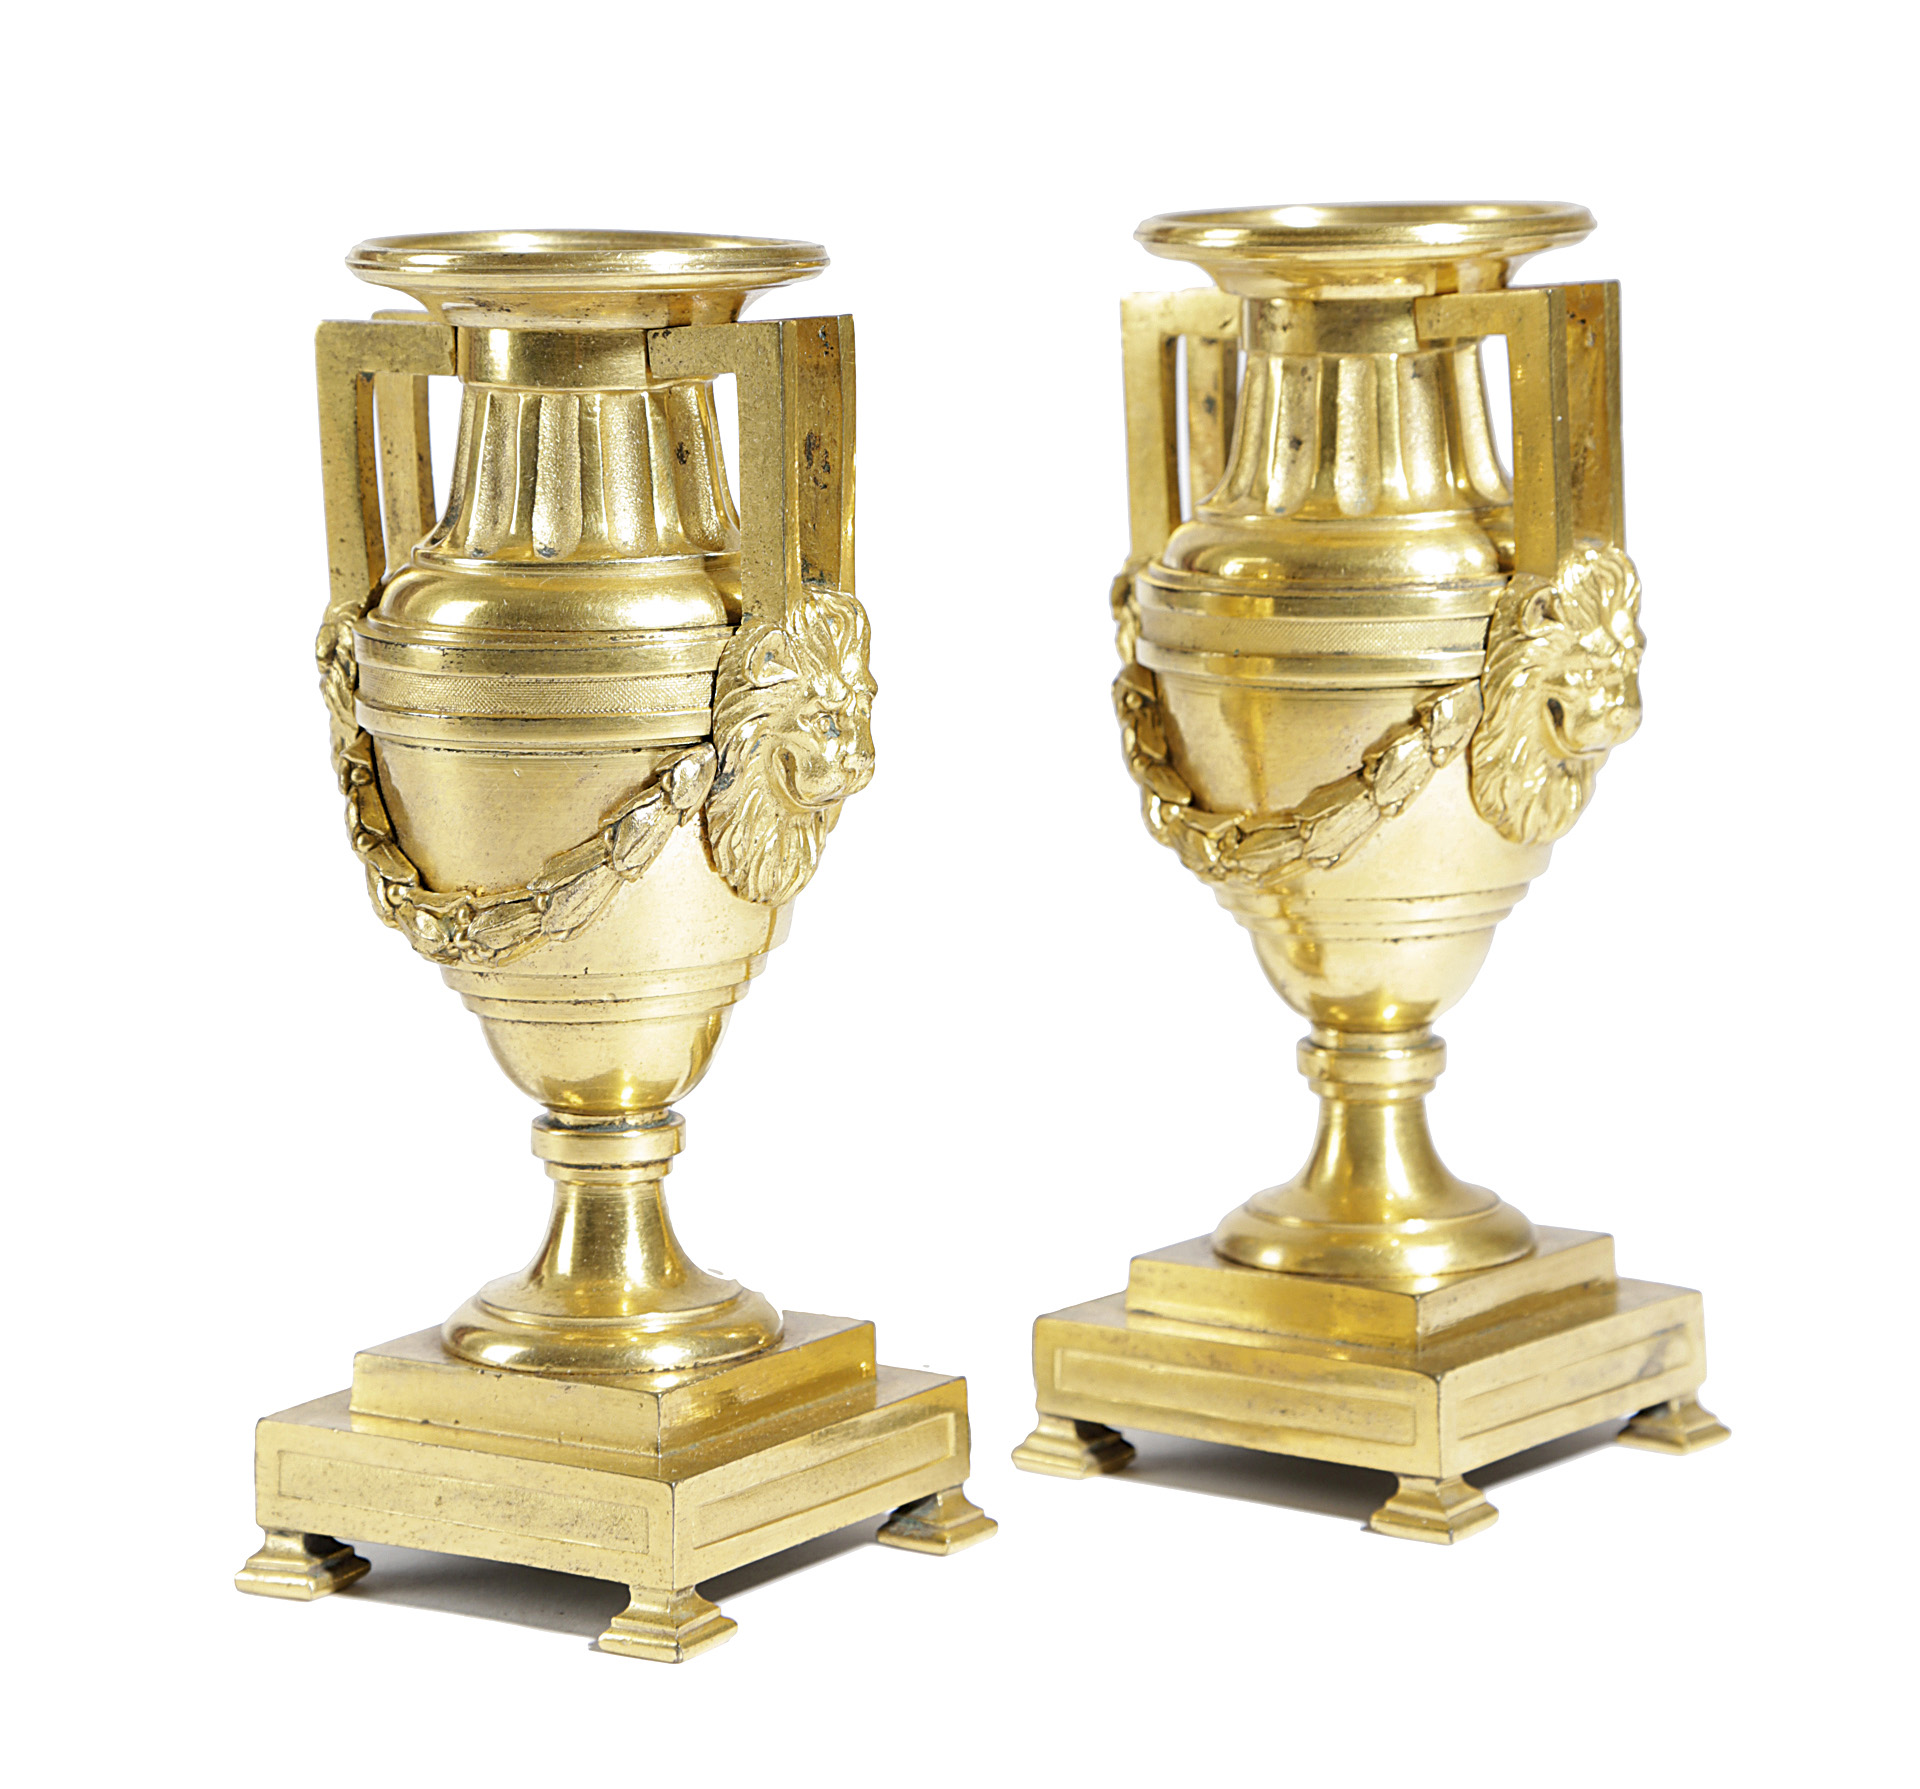 A PAIR OF GEORGE III ORMOLU CANDLESTICKS IN THE MANNER OF MATTHEW BOULTON, C.1770 each in the form